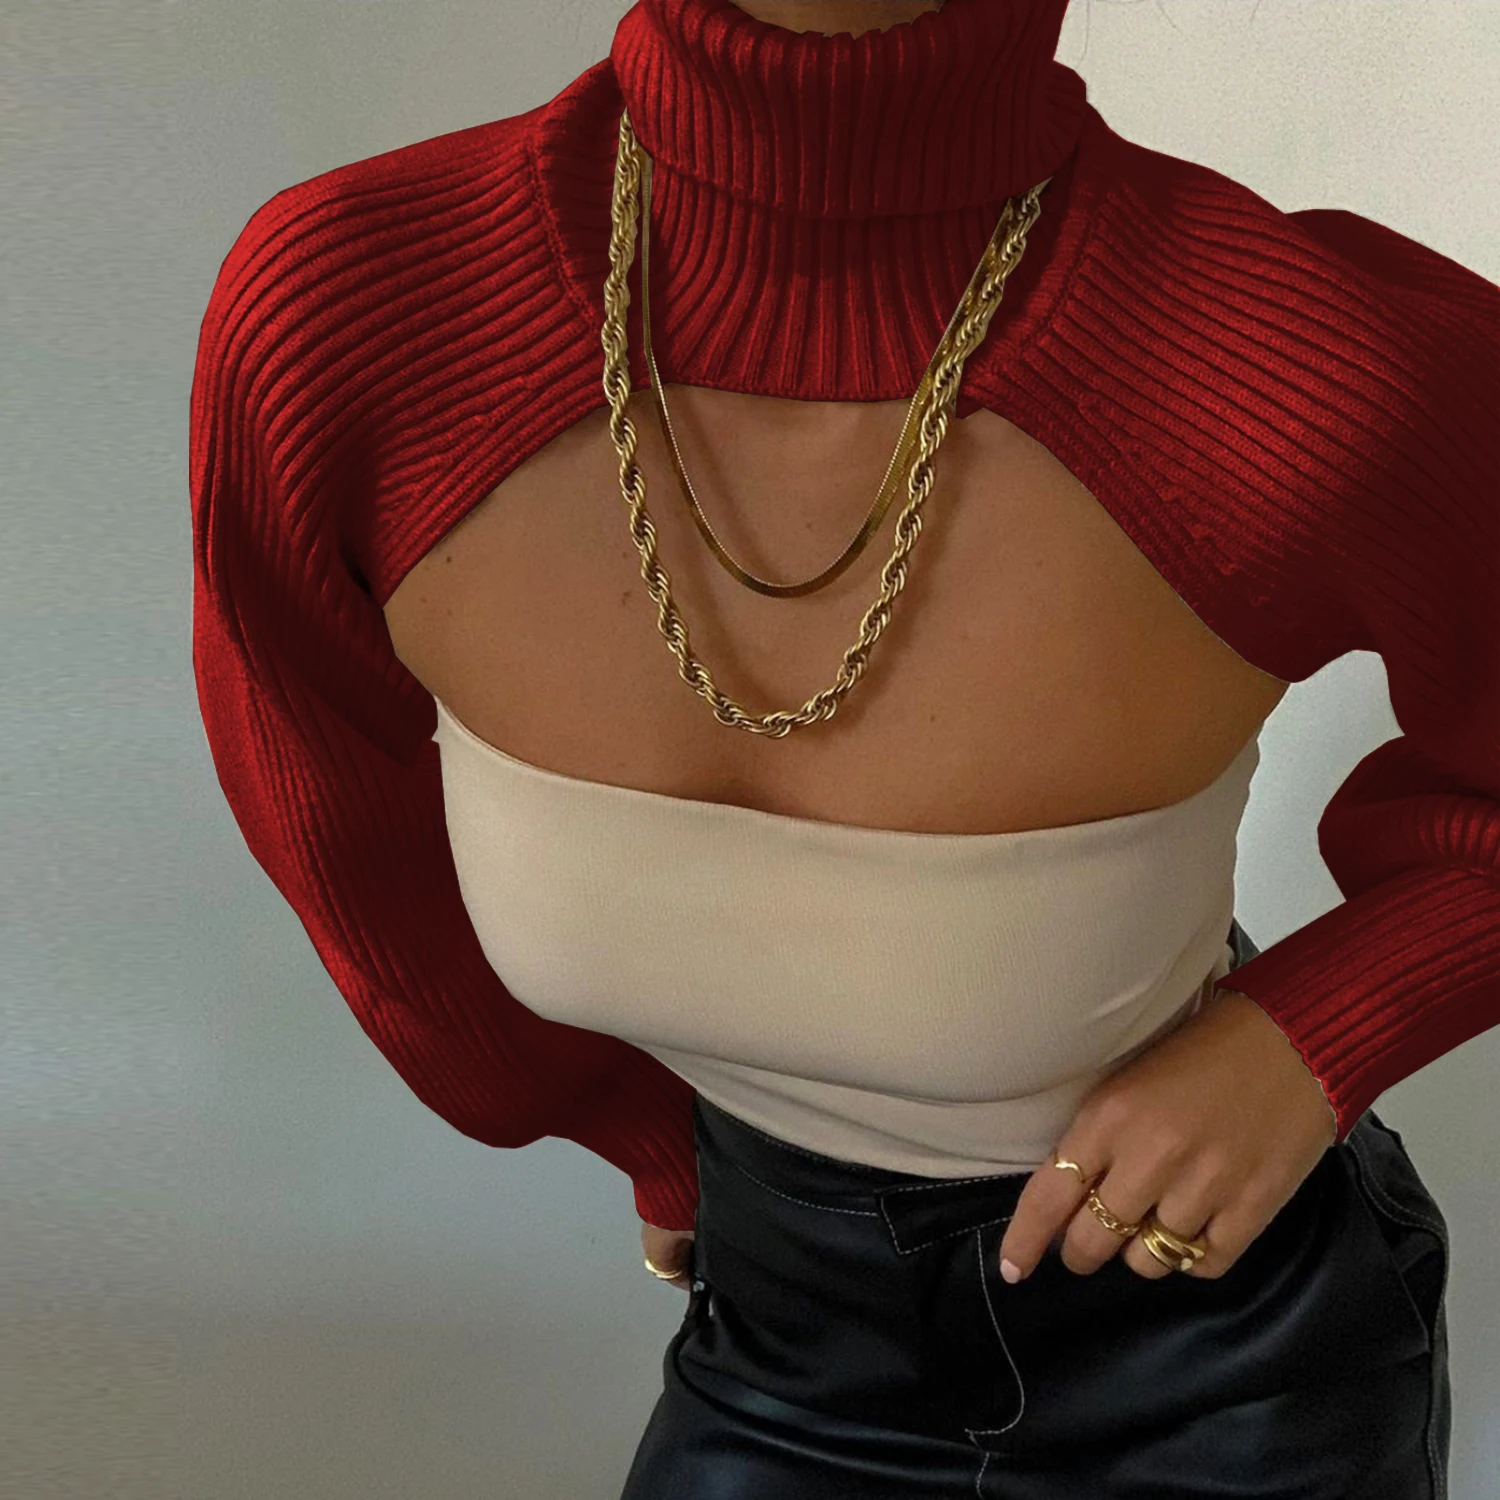 black sweater Women's Turtleneck Knitted Ultra Short Pullover Top Solid Color Long Puff Sleeve Cutout Backless Crop Top Sweater Knitwear vintage sweaters Sweaters